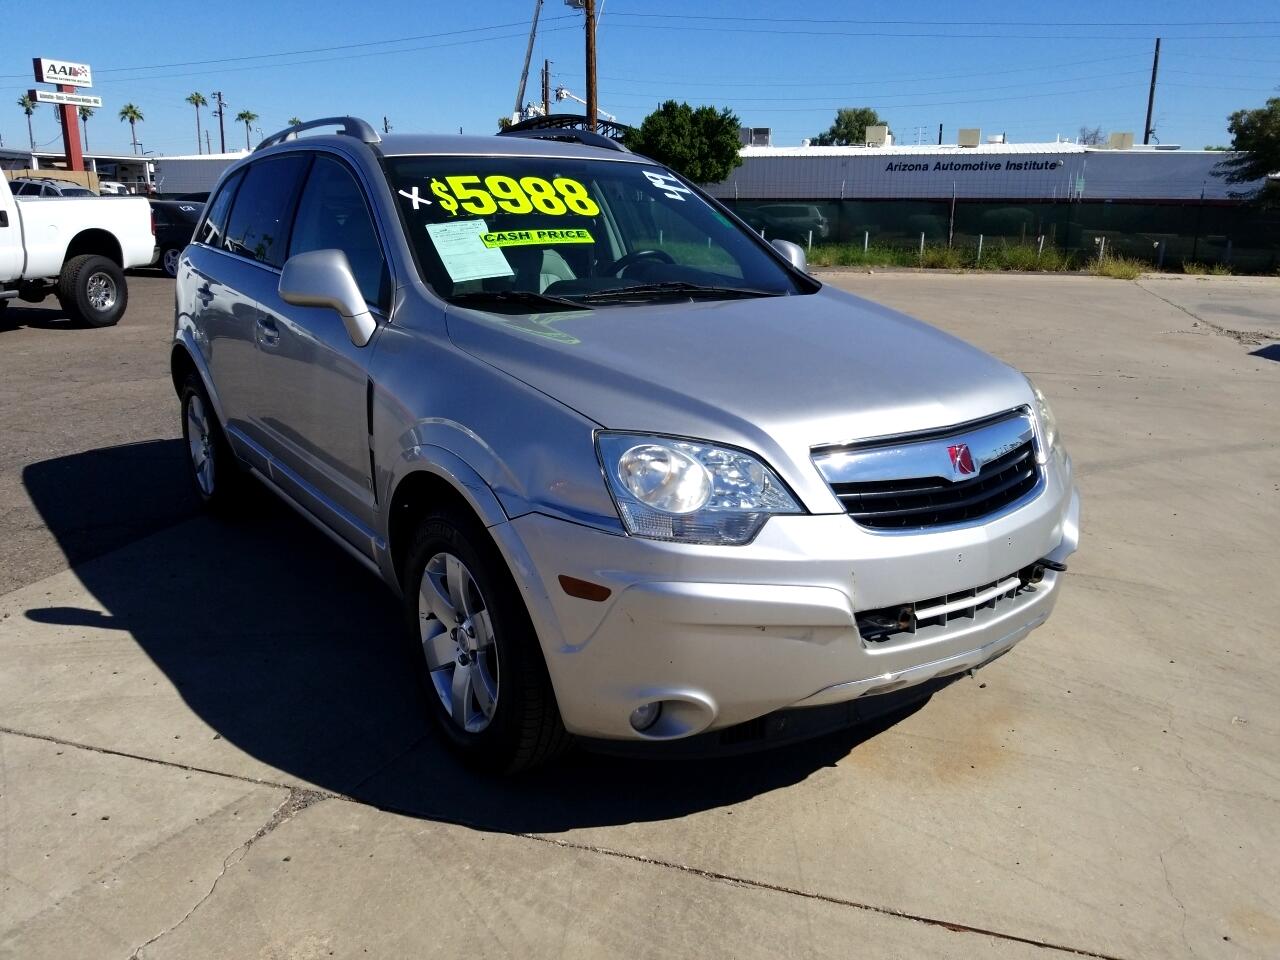 Used 2008 Saturn Vue Fwd V6 Xr For Sale In Phoenix Az 85301